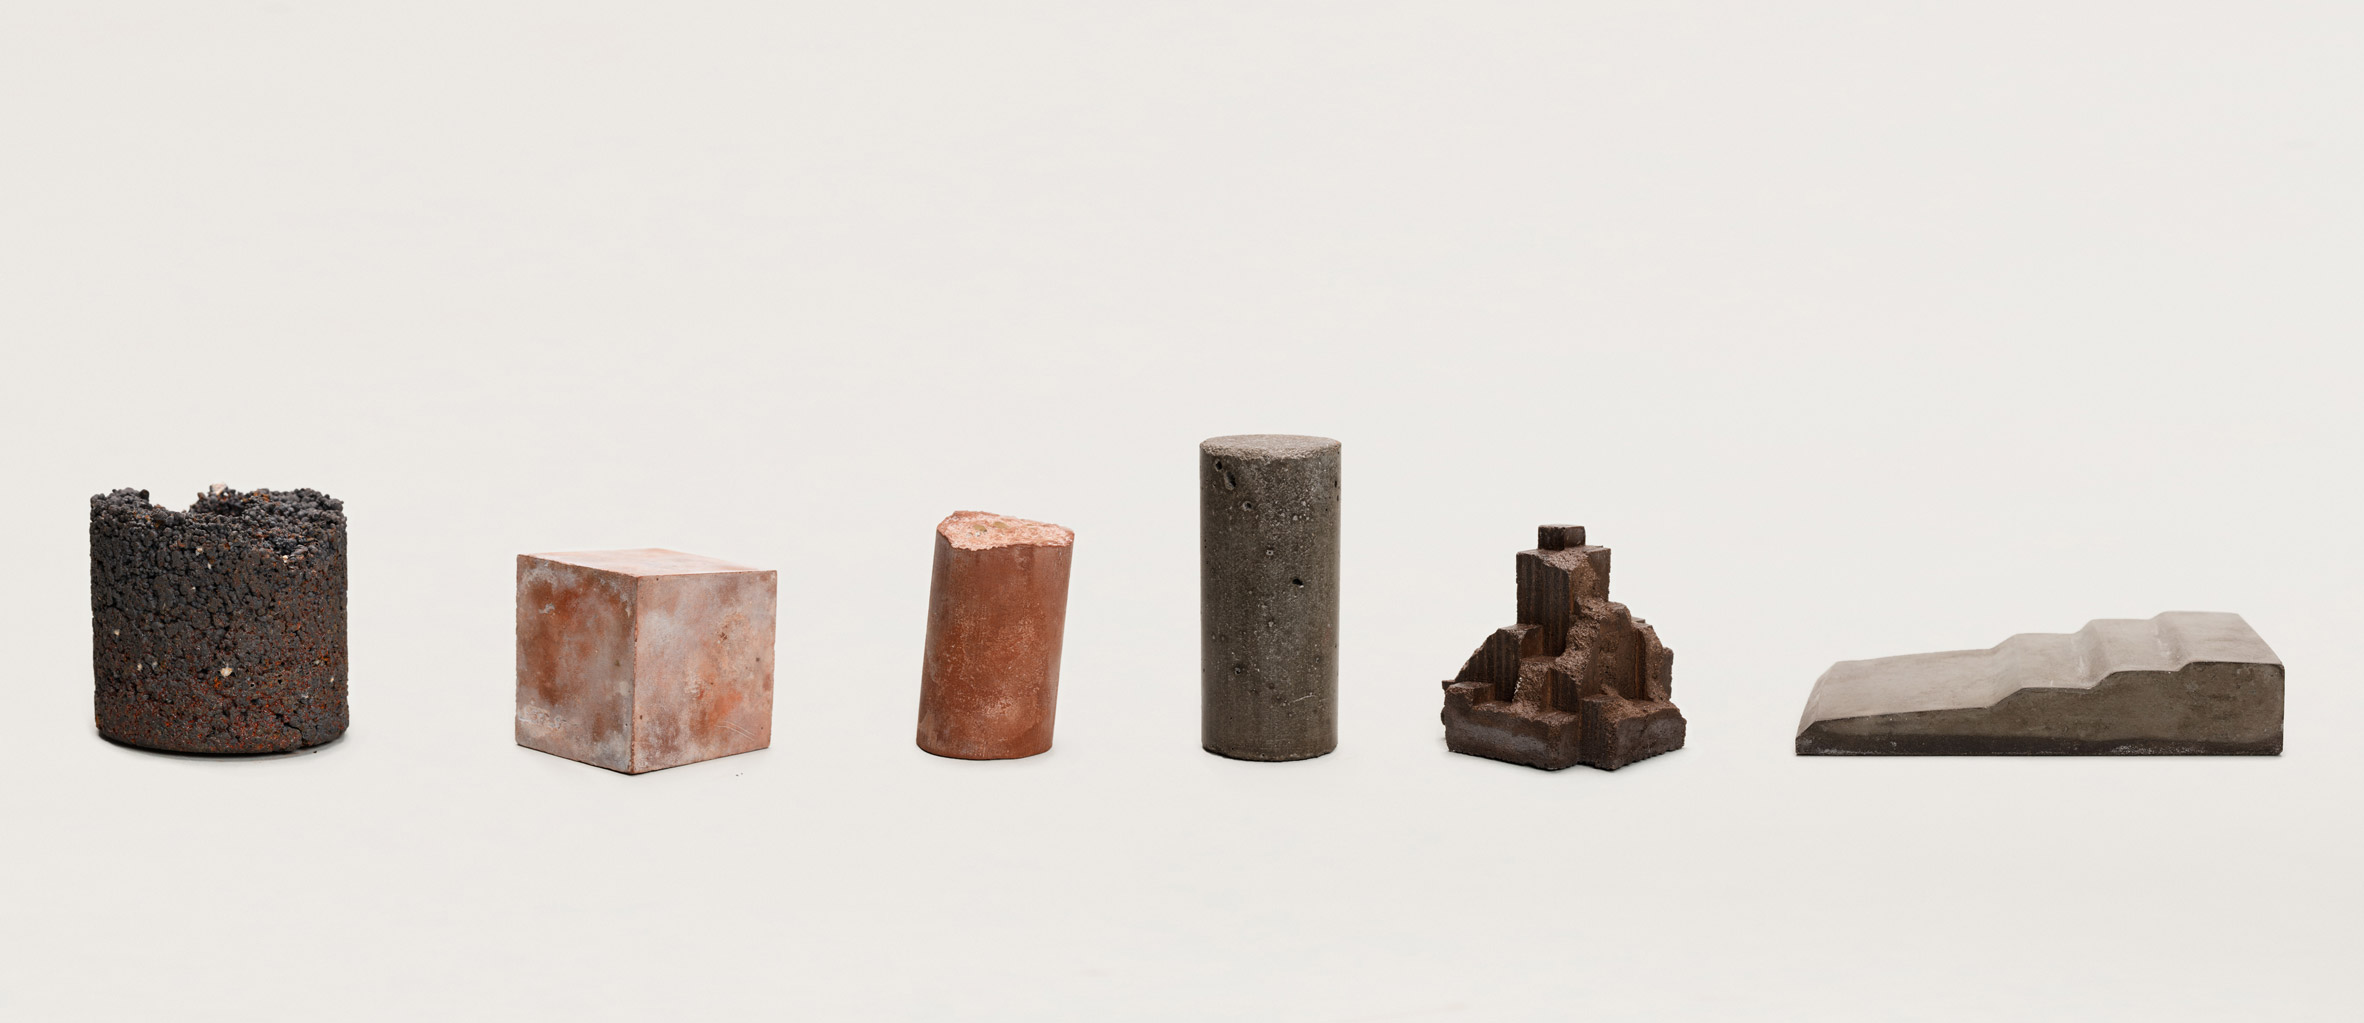 rca-red-mud-objects-design_dezeen_2364_col_1